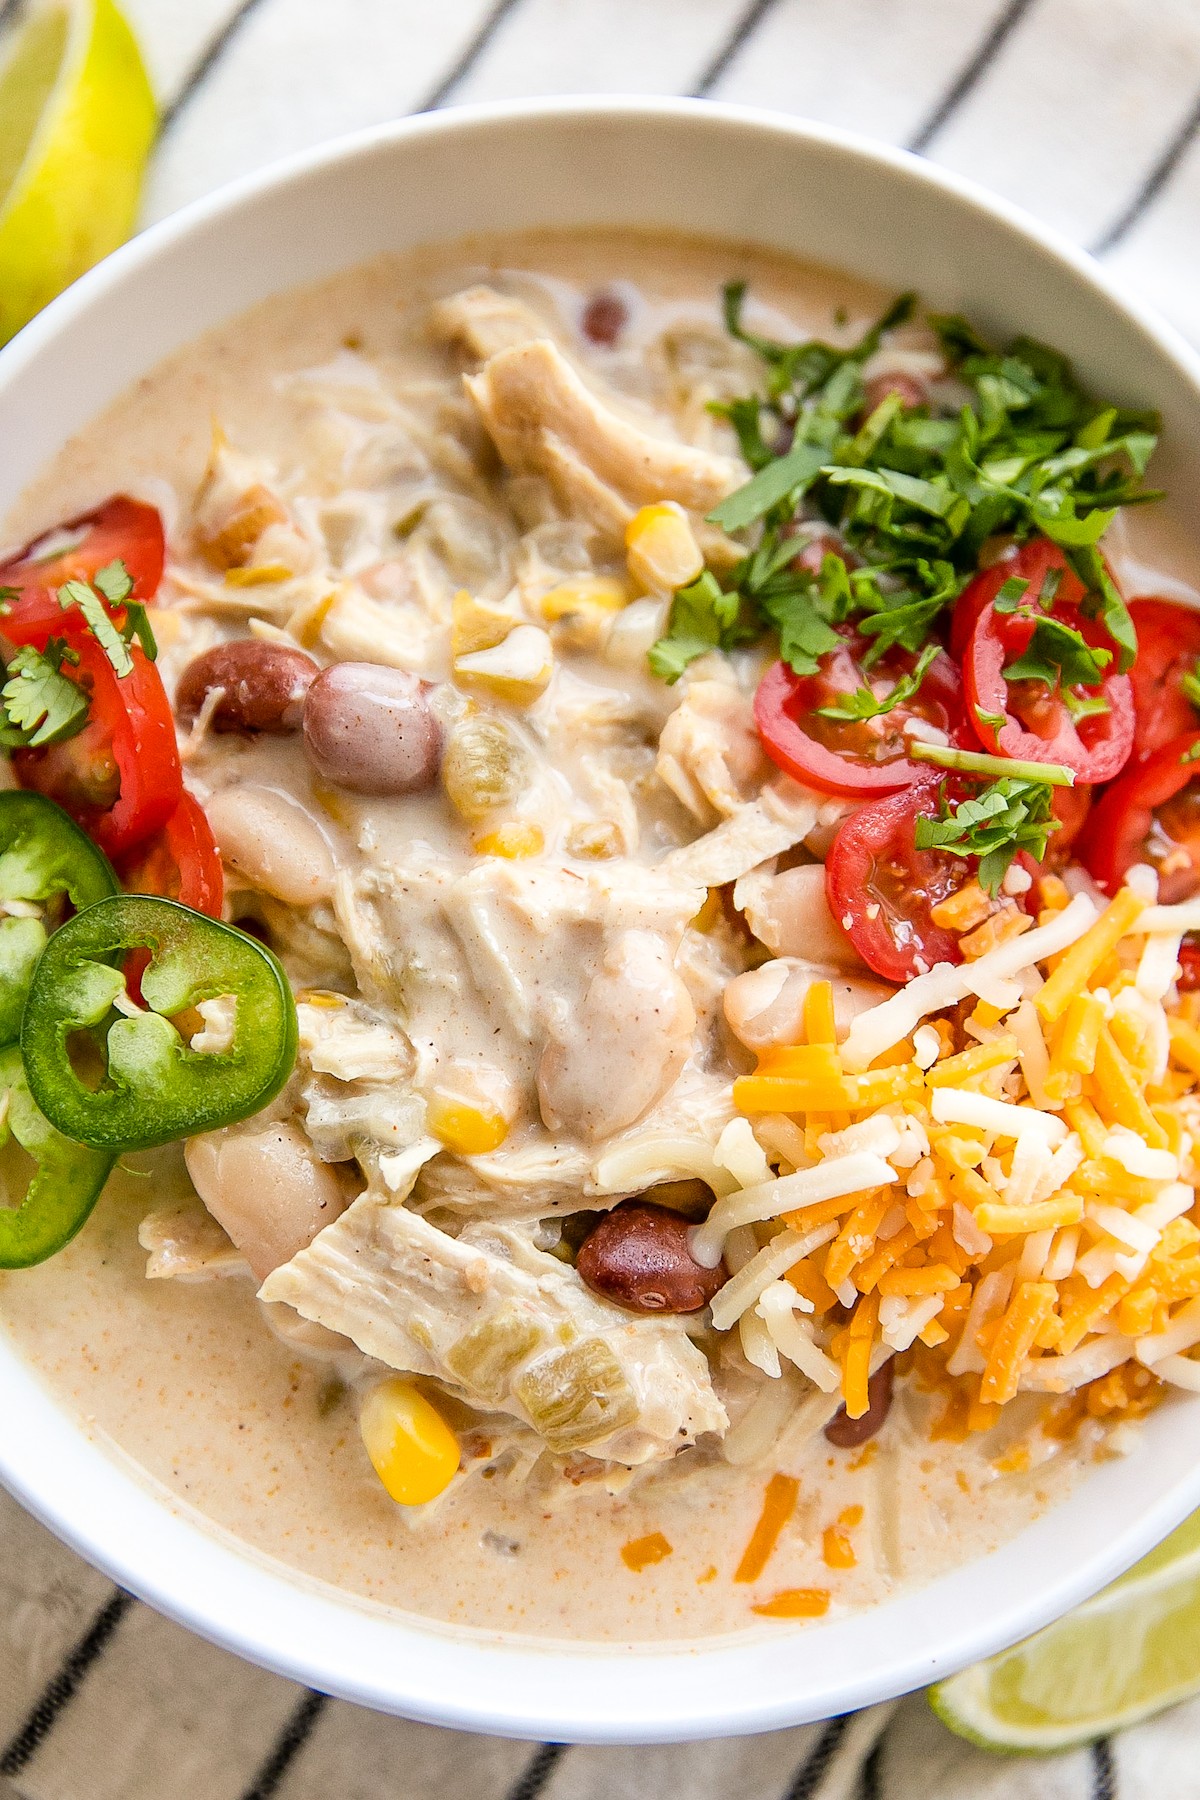 A bowl of chicken chili with shredded cheese and other toppings.